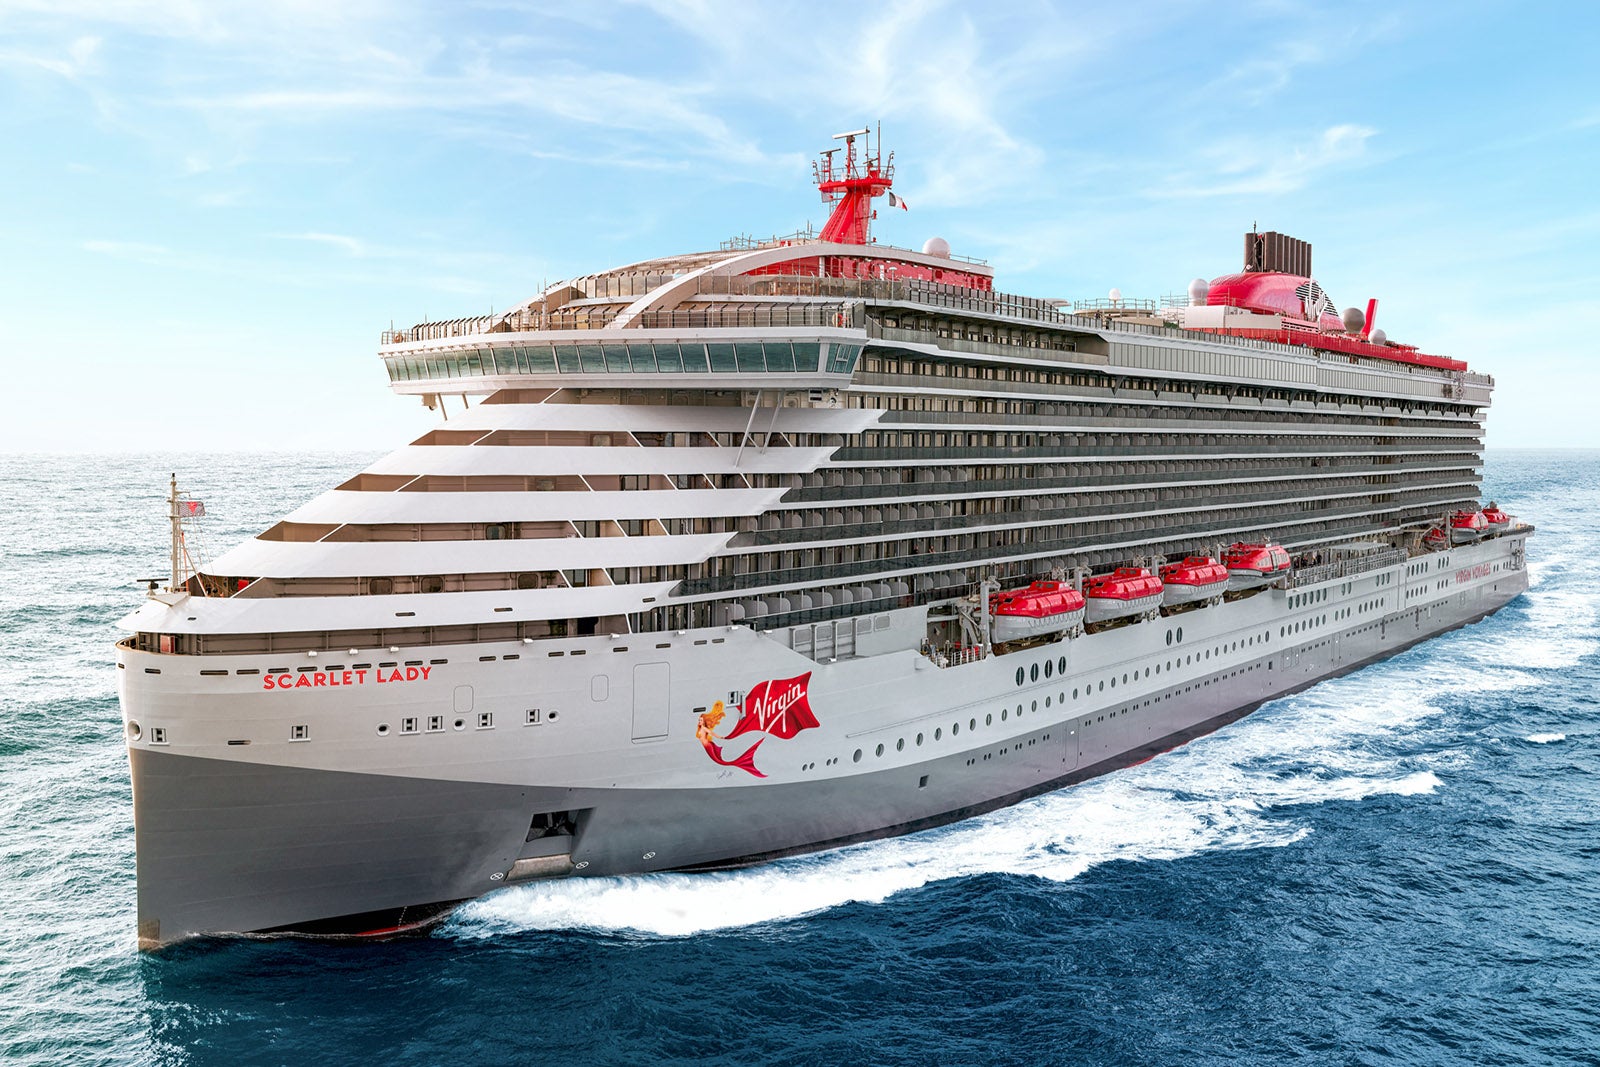 Virgin Voyages plans first cruises from New York, Los Angeles with new ship